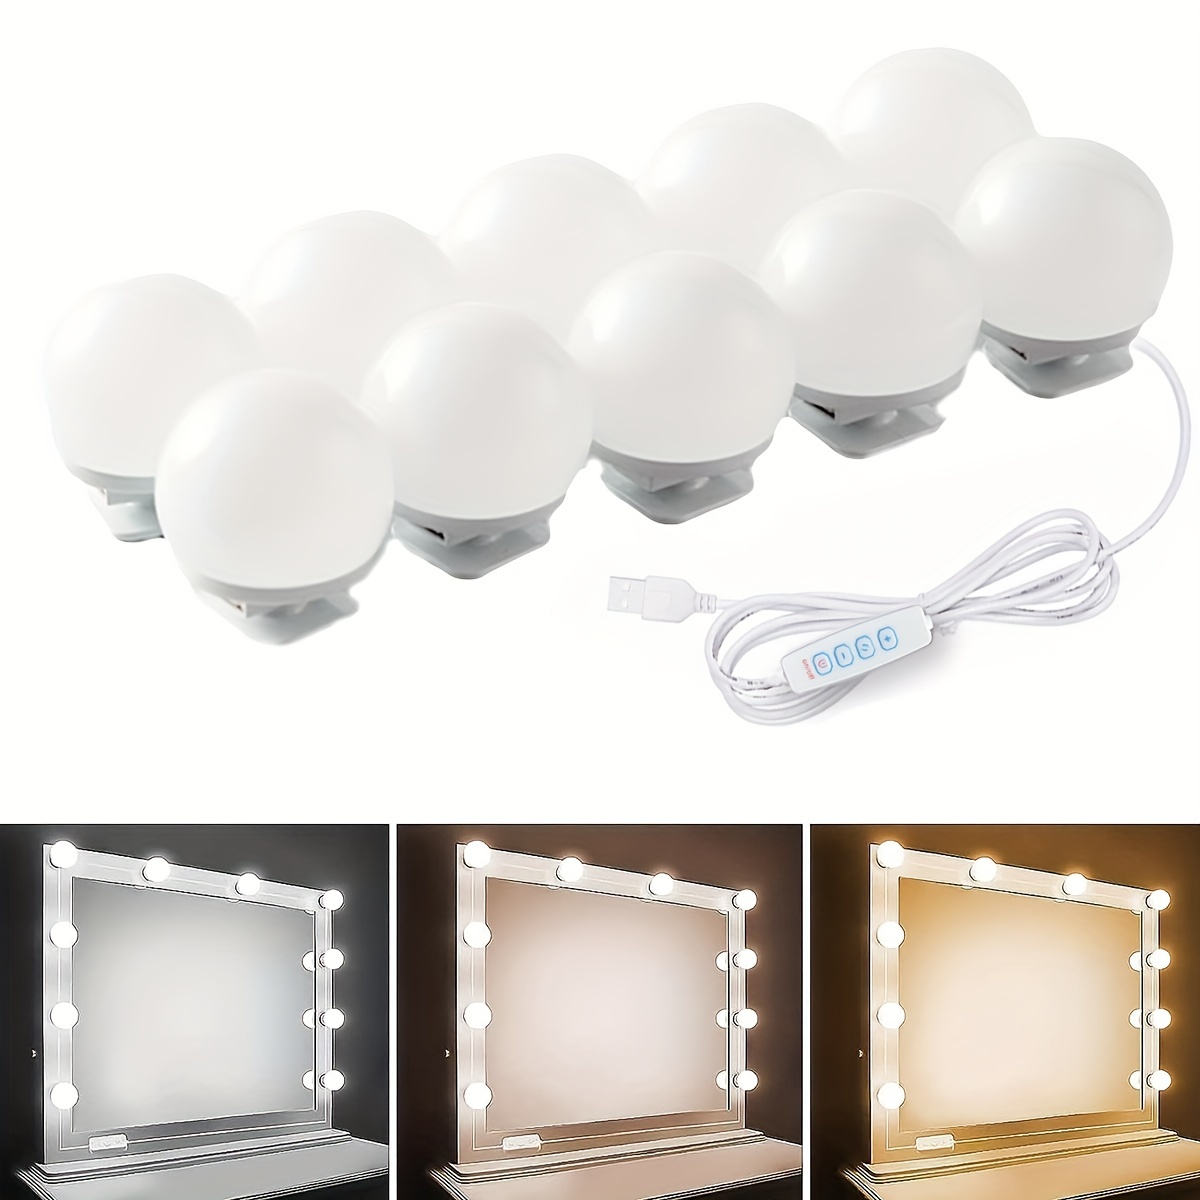 Lampe miroir LED DIY Lampe USB Maquillage Variable 10 LED Eclairage 360